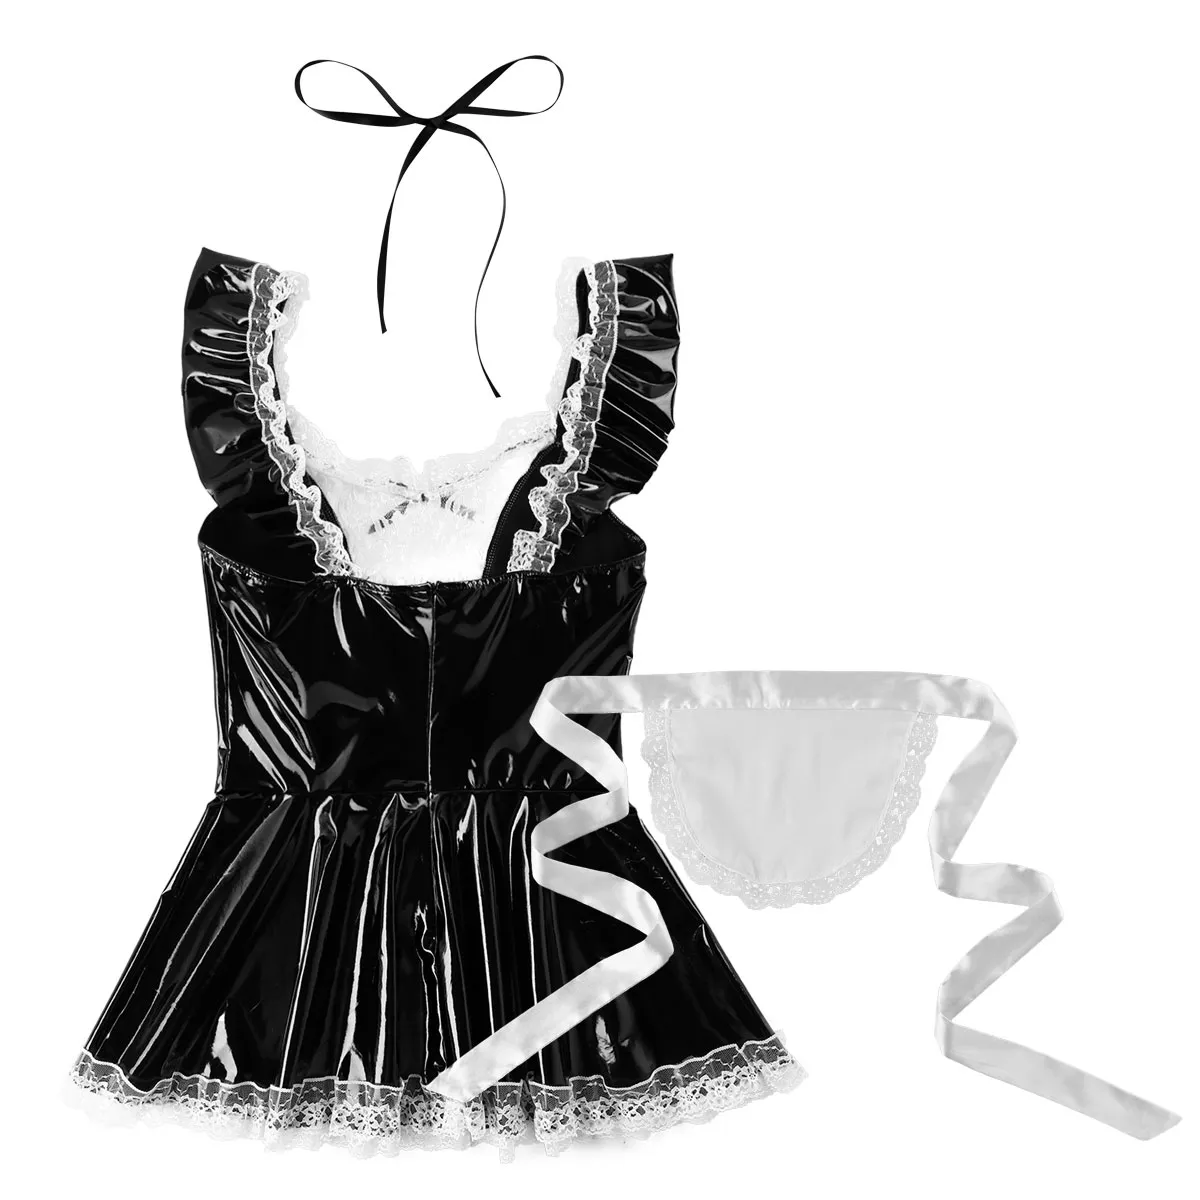 Mens Halloween Cosplay Costume Erotic French Maid Uniforms Male Sissy Roleplay Lace Trim Babydoll Mini Dress with Apron Neckwear300P